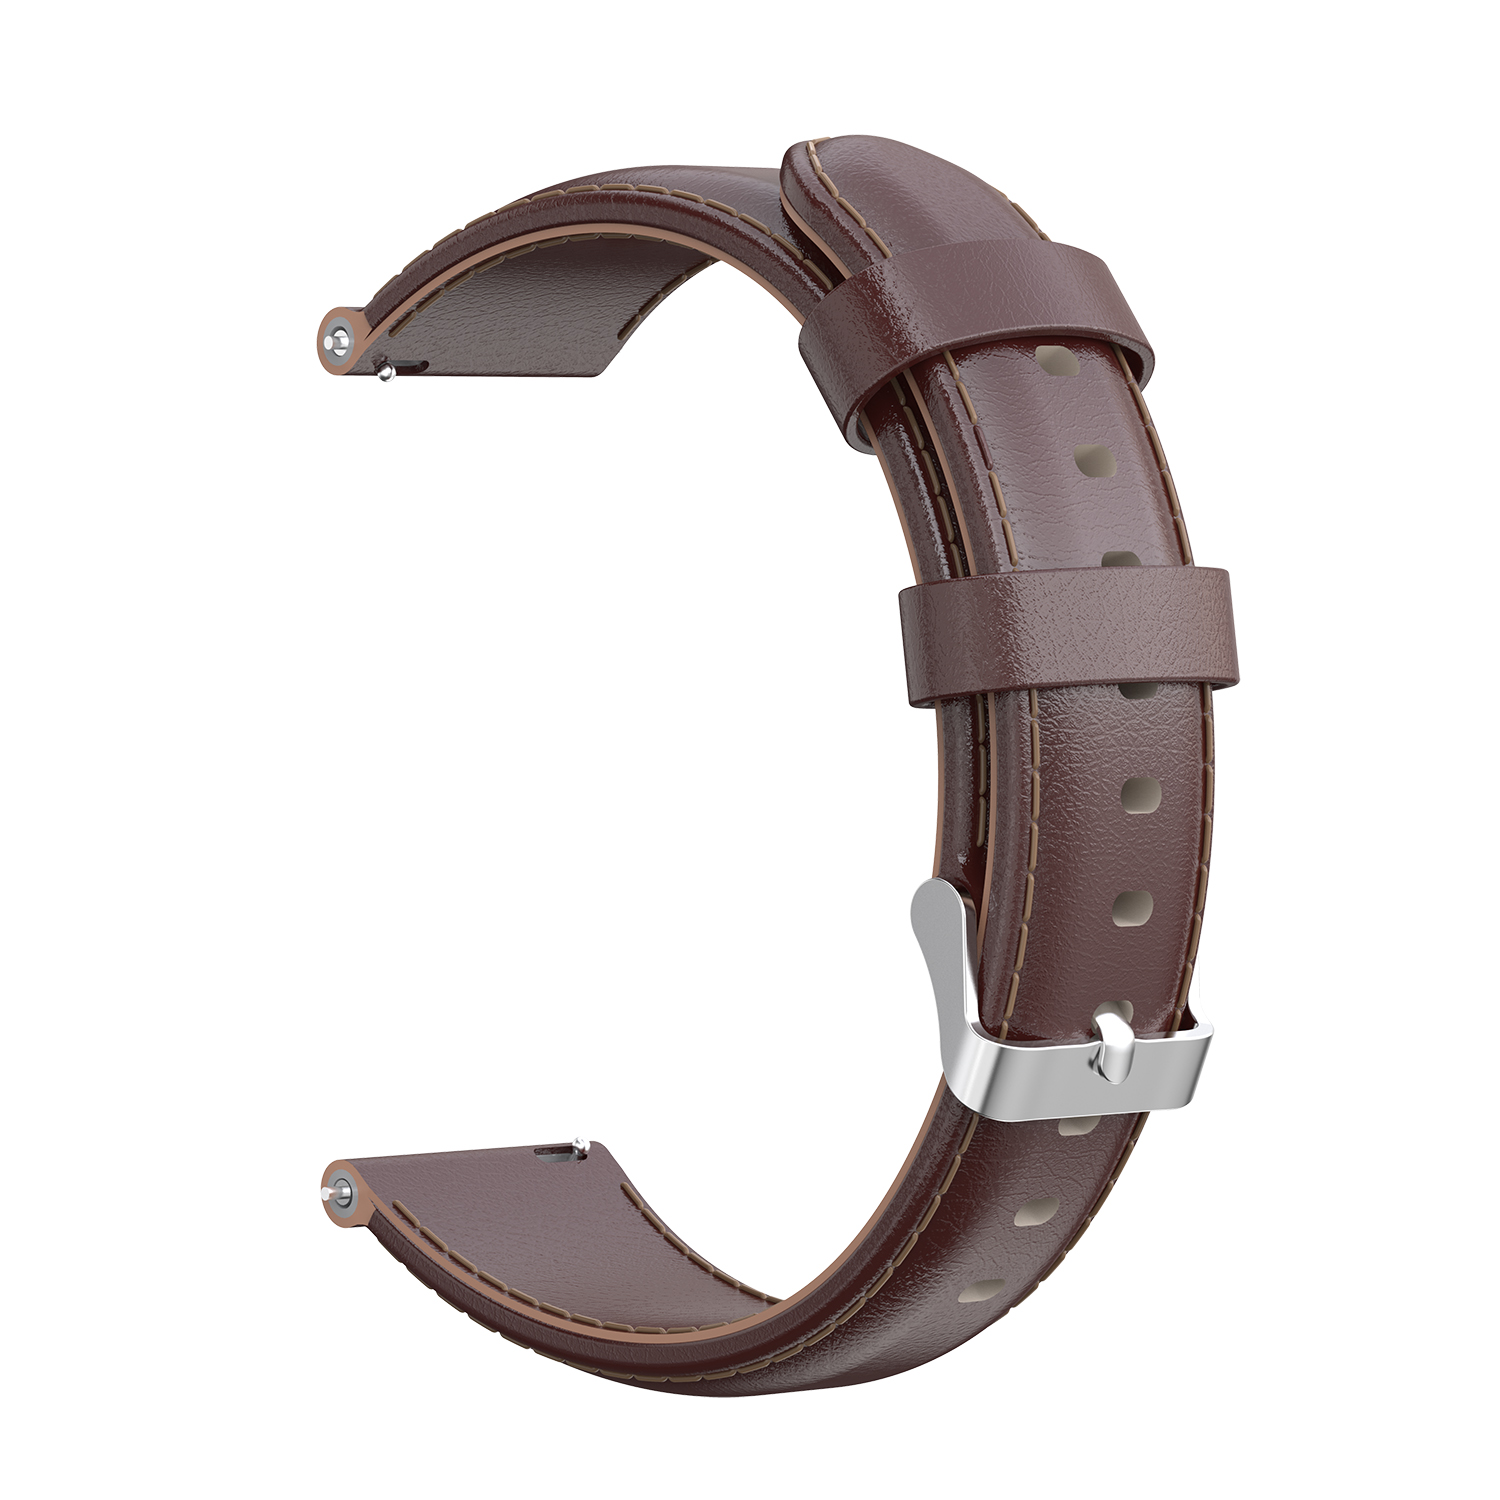 Bakeey-22mm-Genuine-Leather-Replacement-Strap-Smart-Watch-Band-For-Amazfit-GTR-47MM-1786519-22